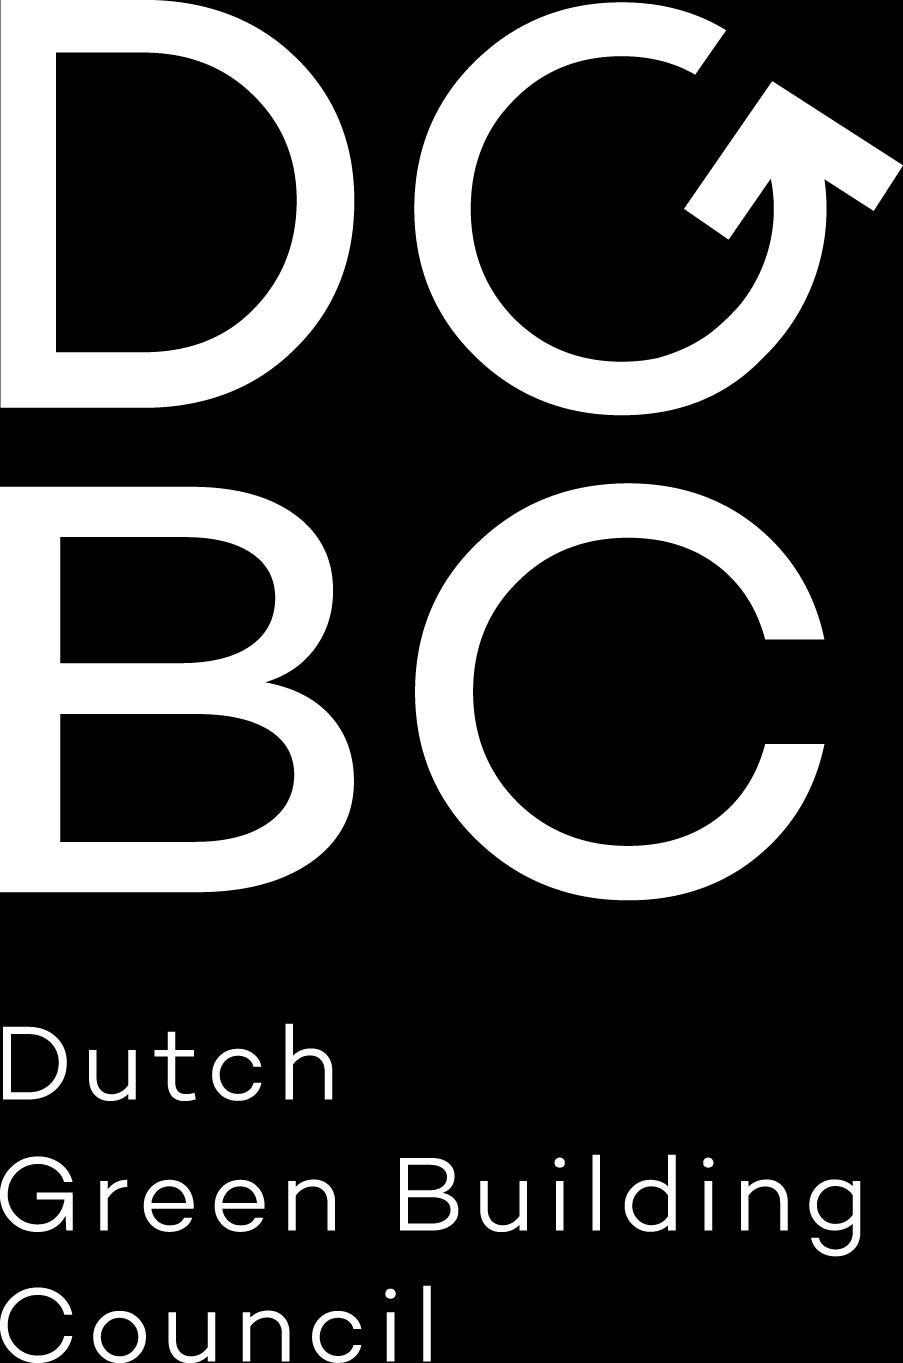 ABC Nova Programmamanager Relatiemanager Commercial Clients Sector Bouw Head of Strategy & Development FM Sectordirecteur Bouw Relatiemanager Strategy Consultant Customer Experience Circulair